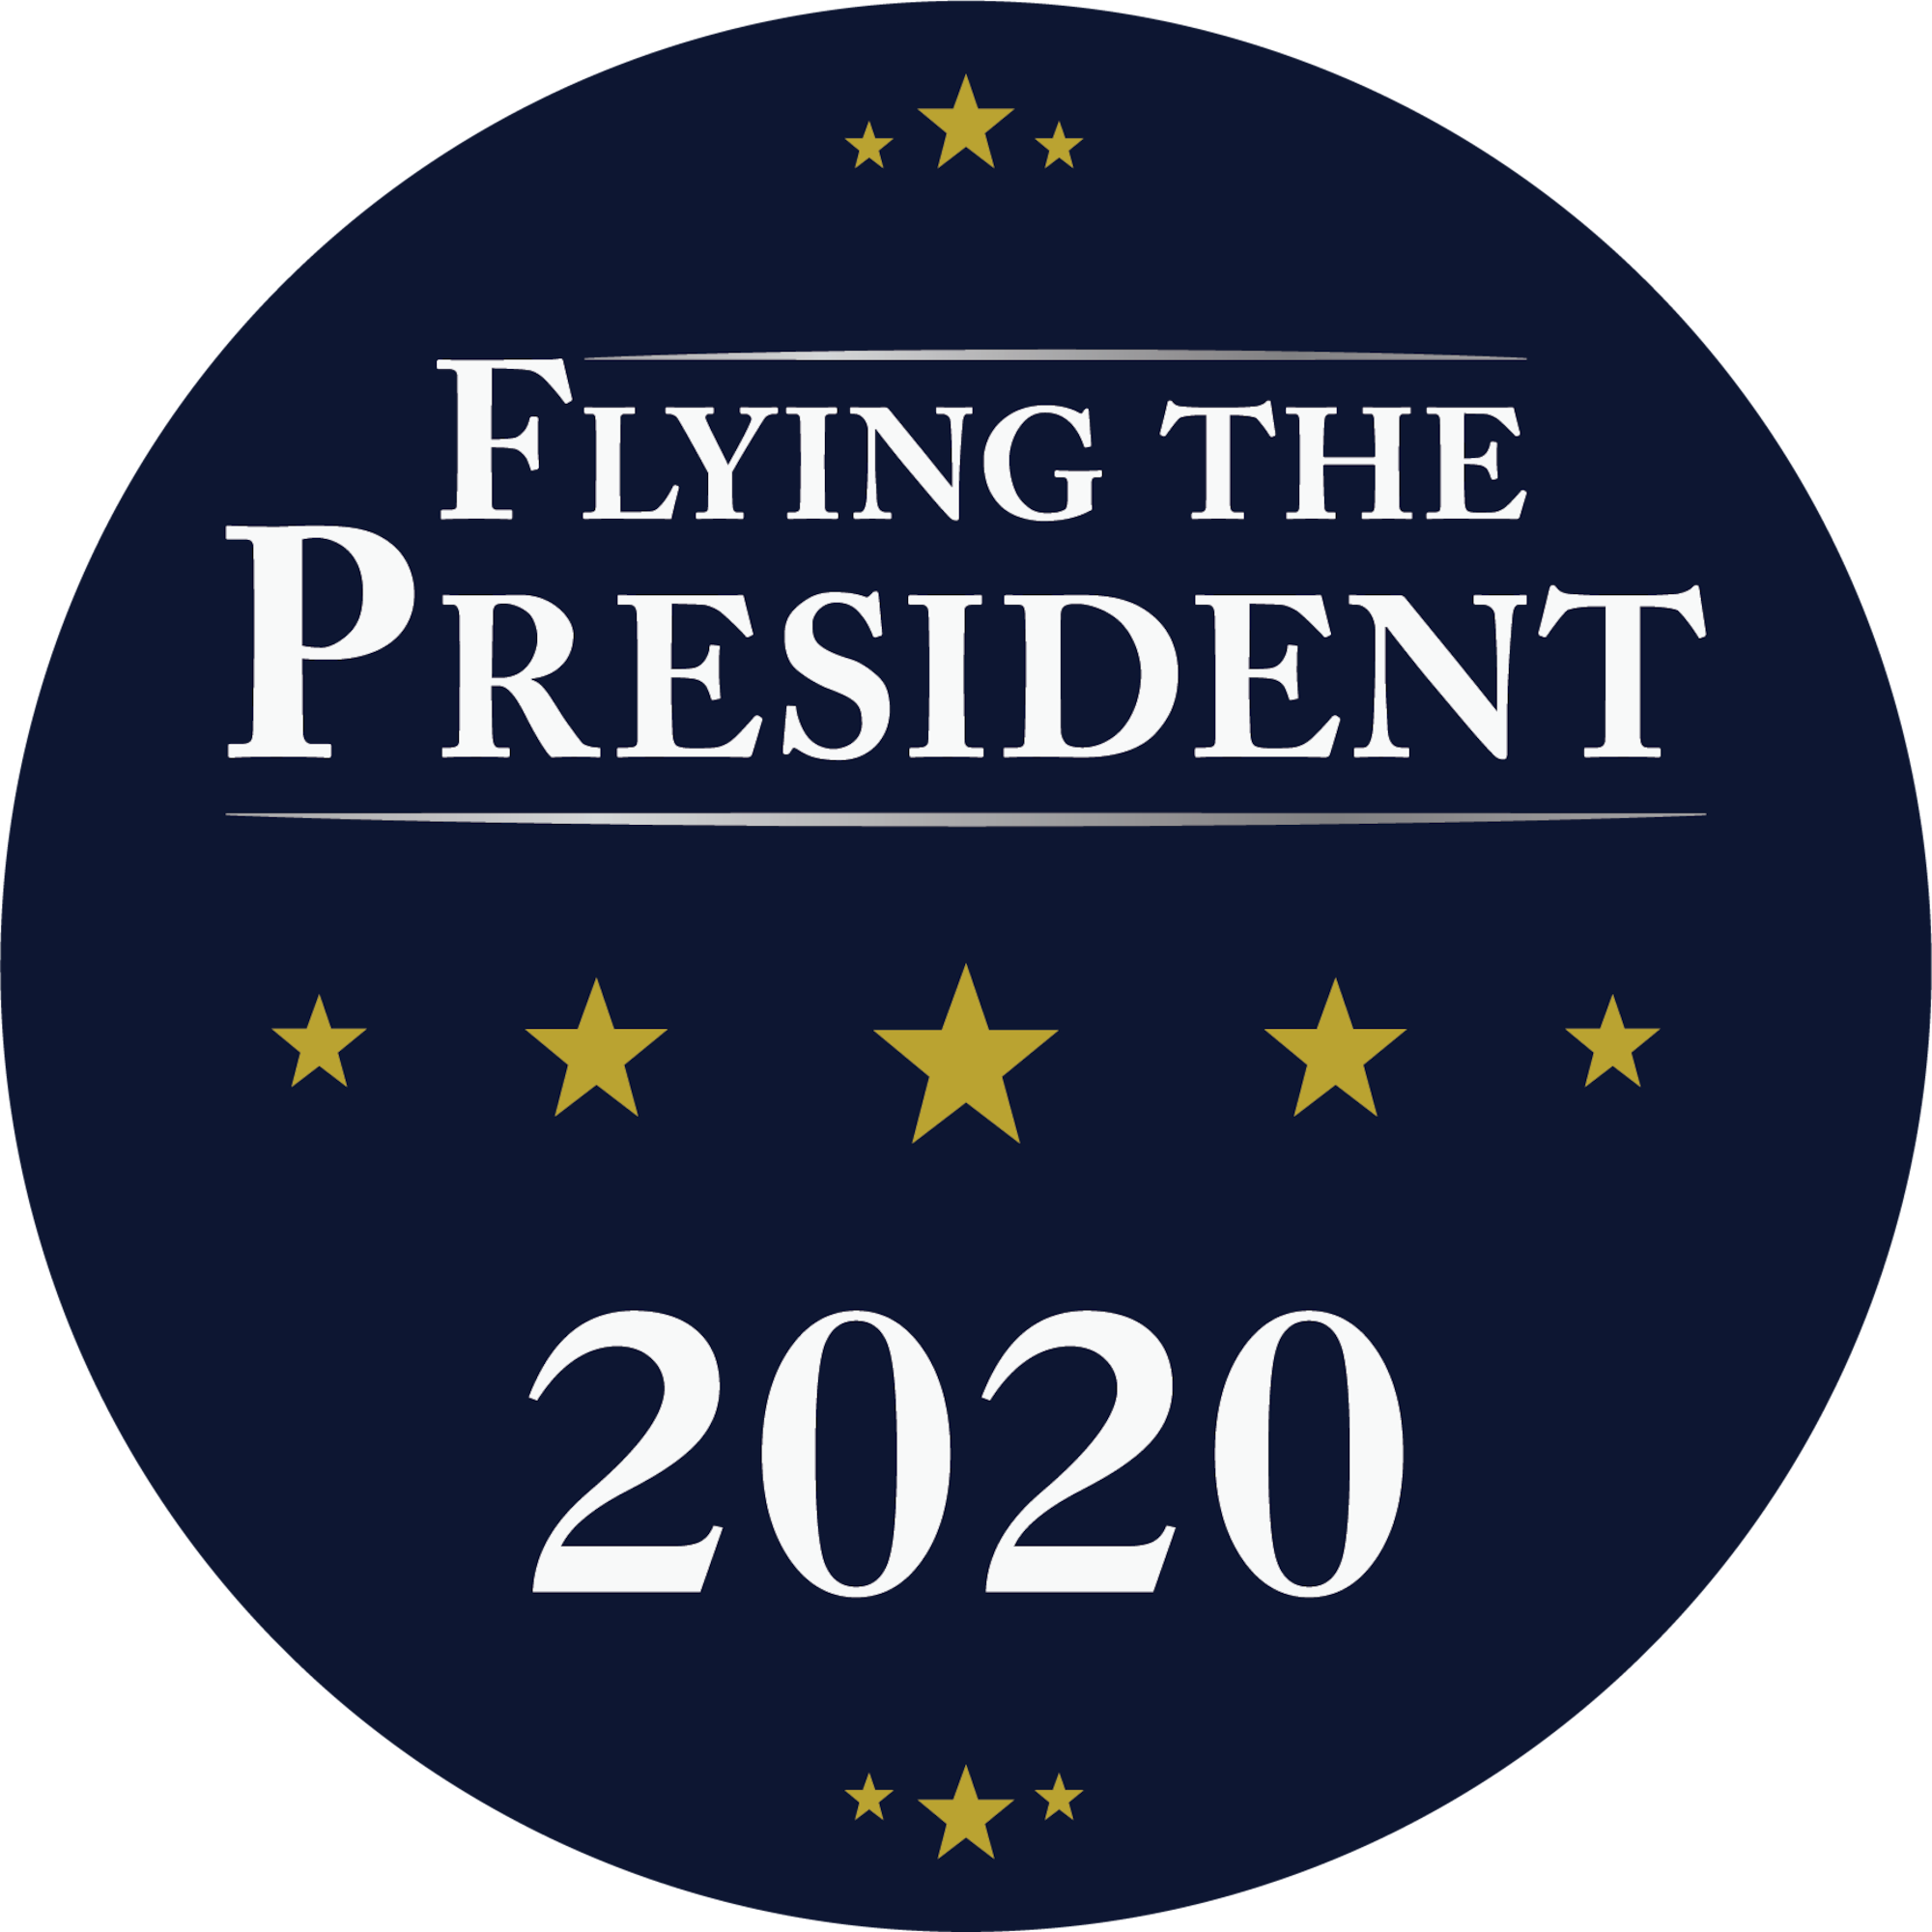 Blue circle with words "Flying the President 2020"